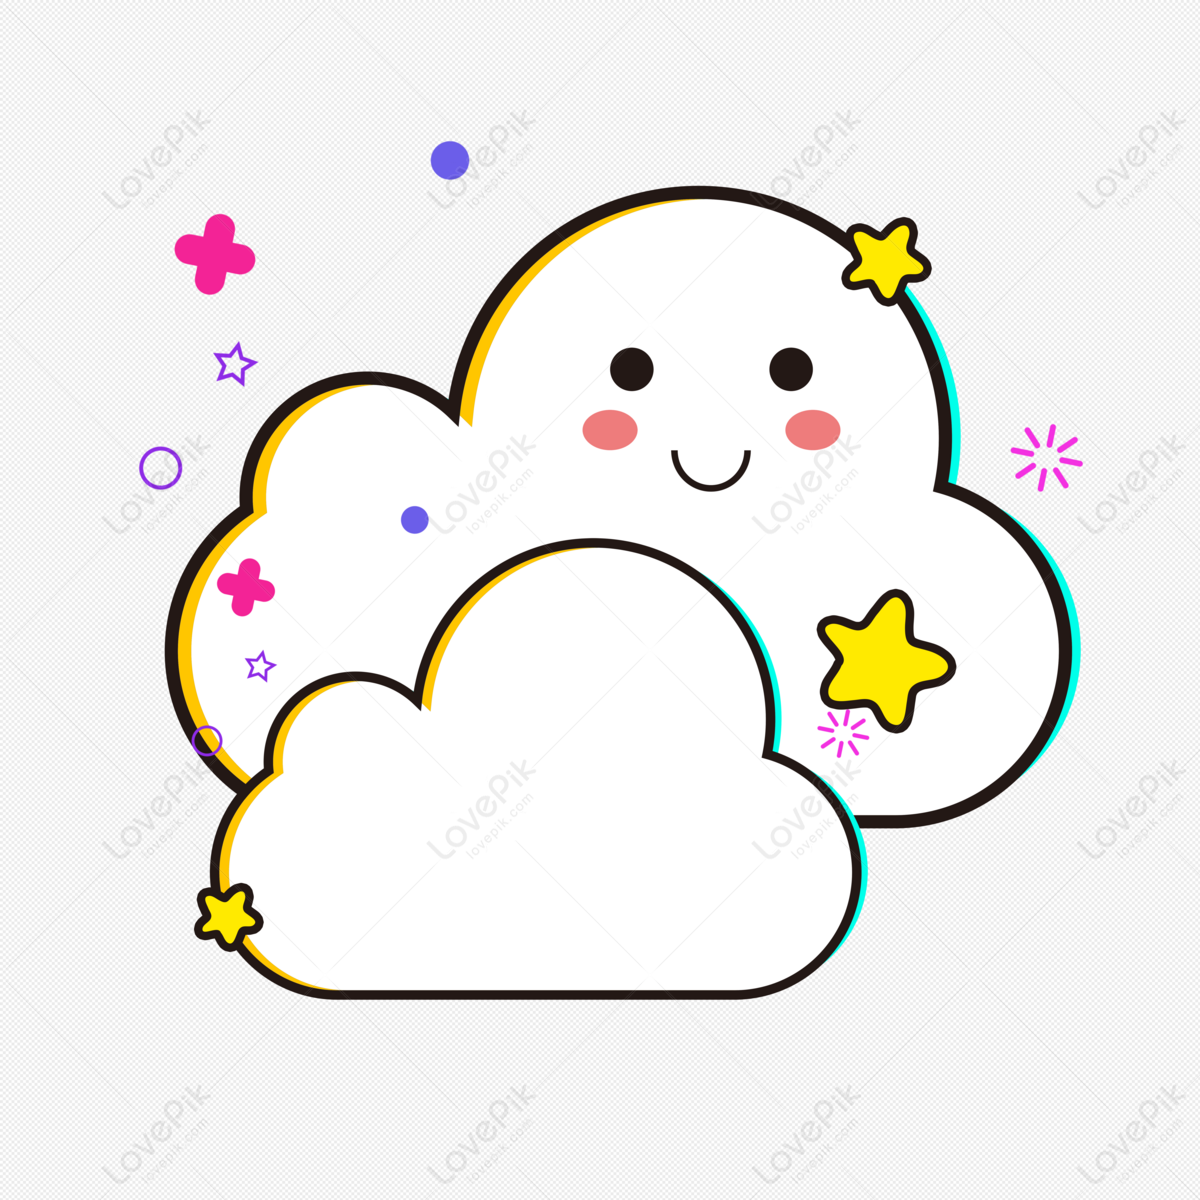 Hand Drawn Cartoon Clouds PNG Transparent And Clipart Image For Free  Download - Lovepik | 401038776